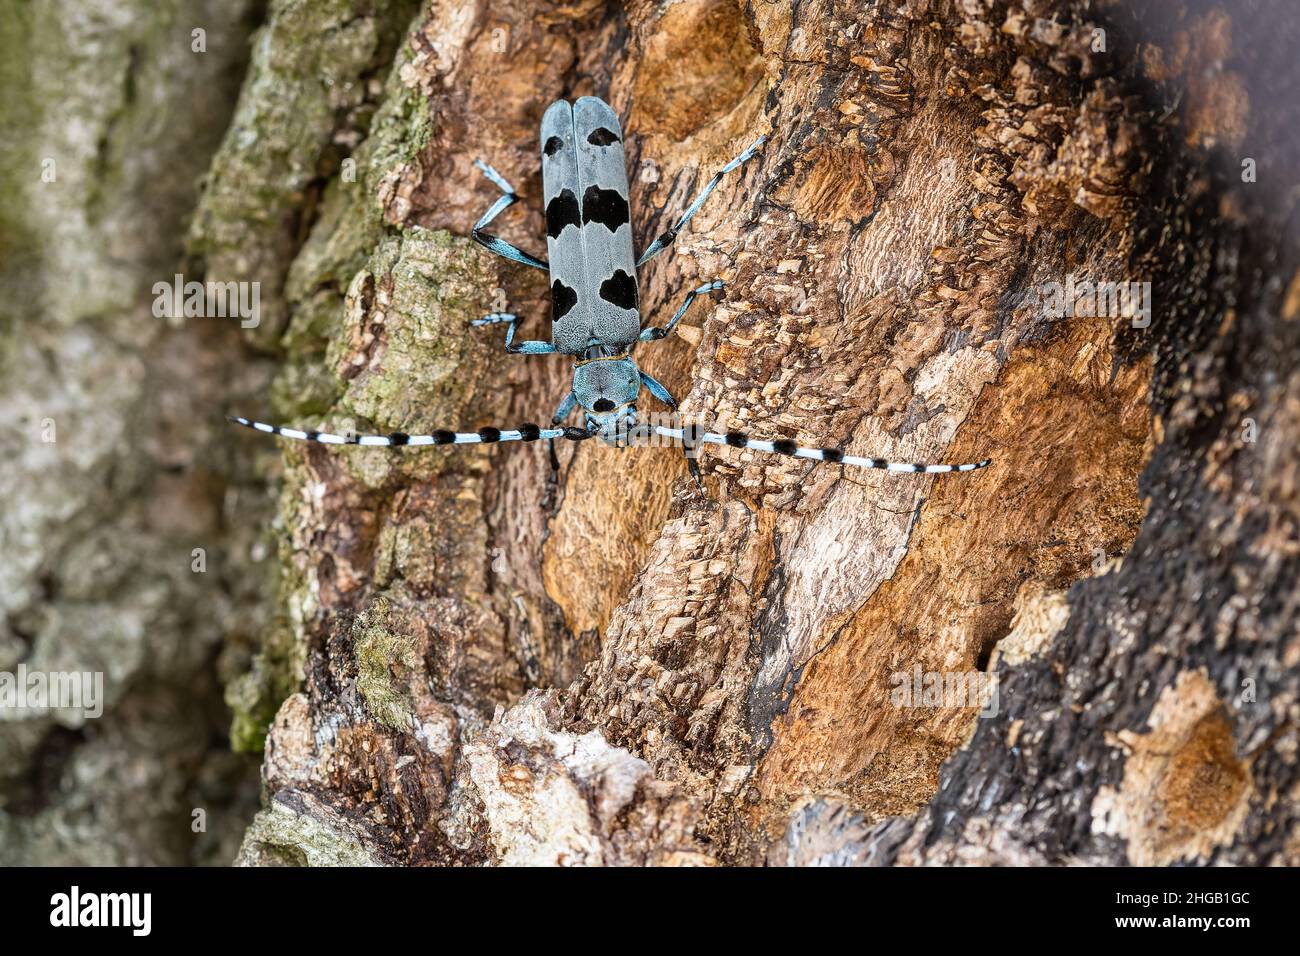 Close up image of the Alpine Longicorn, a blue beetle with black spots, climbing down a beech tree with brown wood and grey bark. Stock Photo